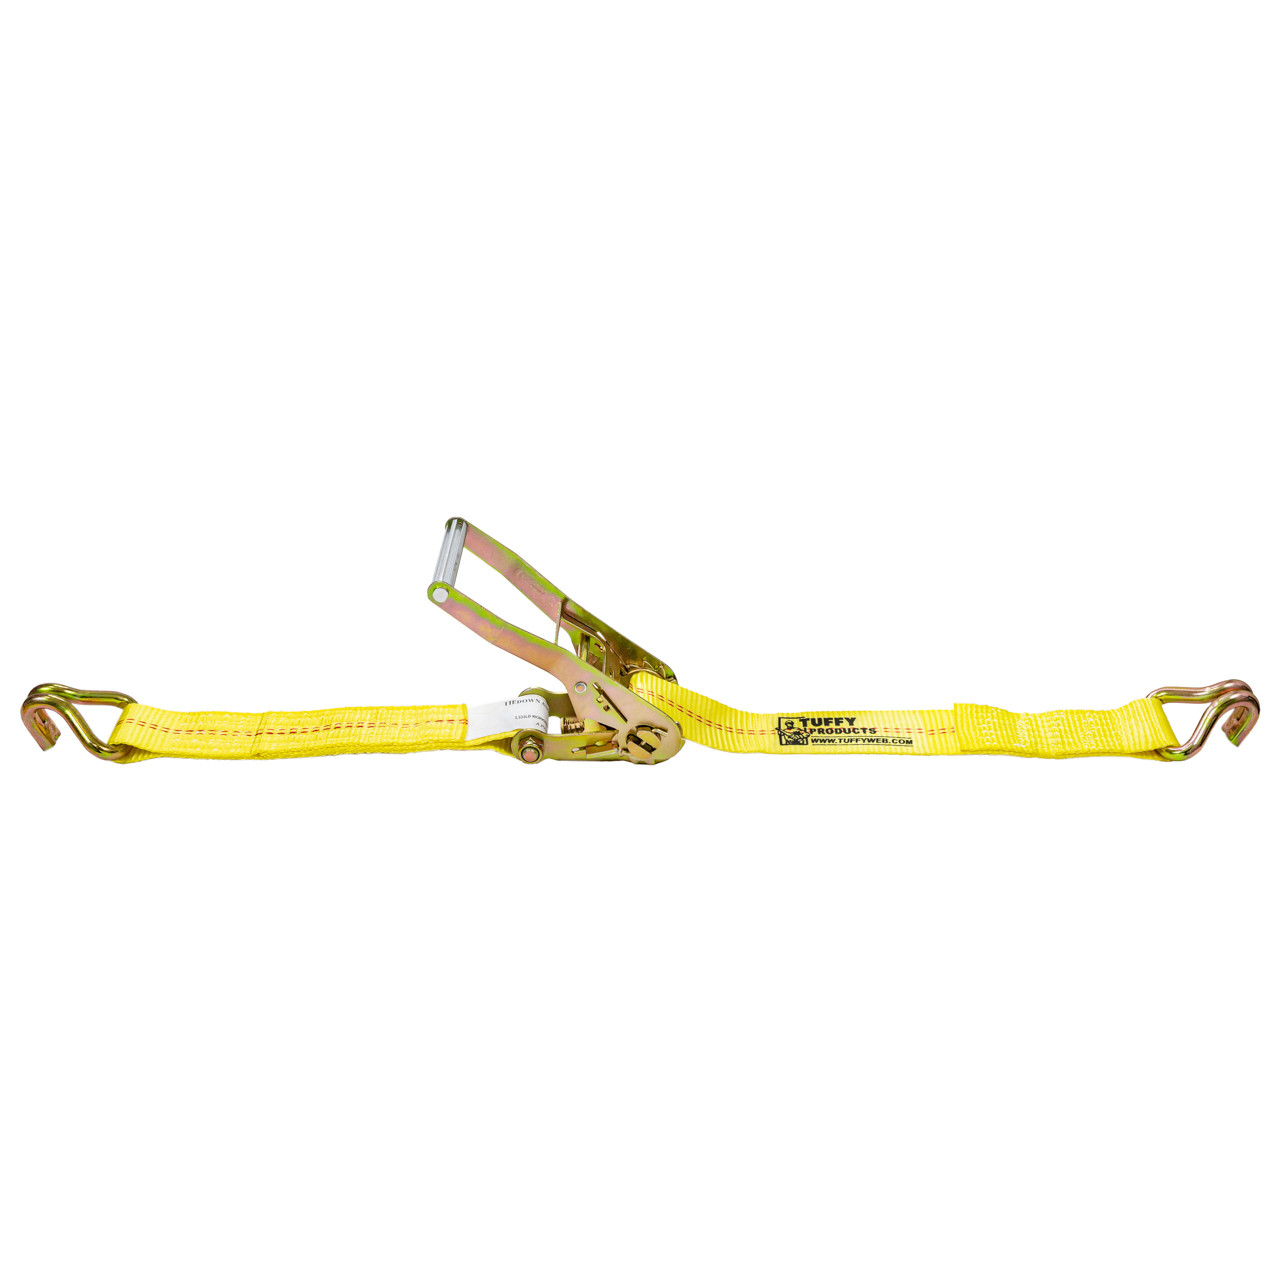 Tuffy 2 x 27 ft Wire Hook Ratchet Strap - 3335 lbs WLL